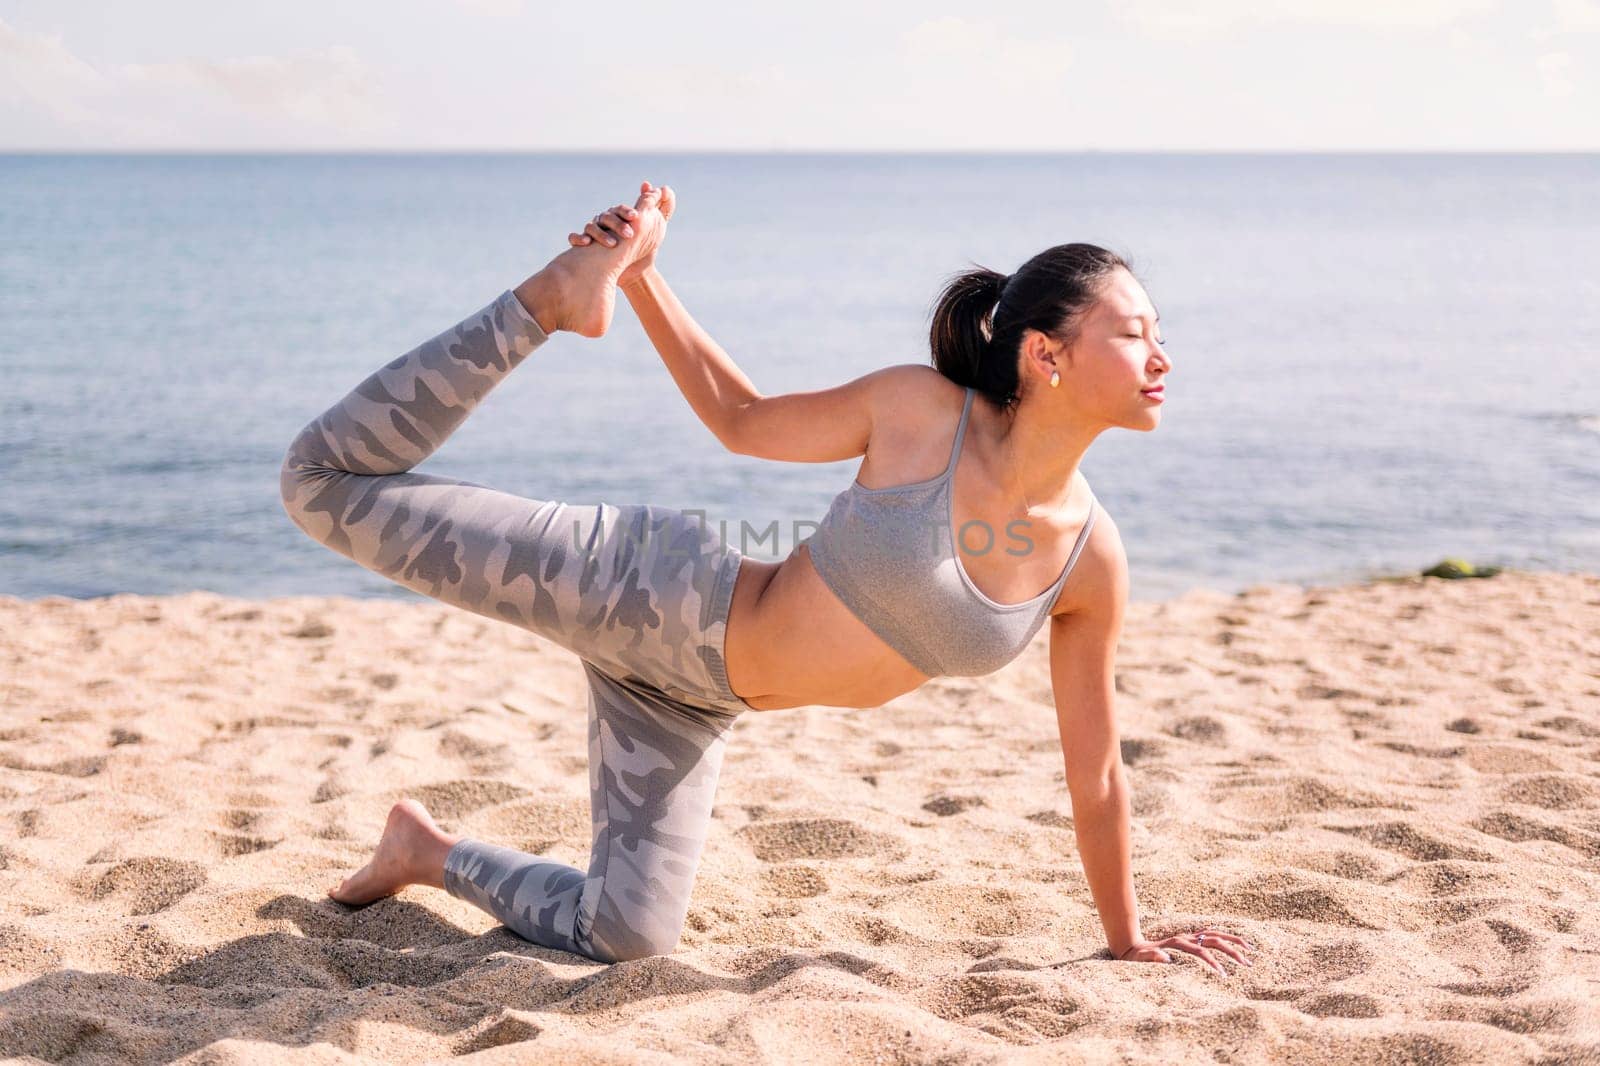 woman stretching on the beach with yoga poses by raulmelldo